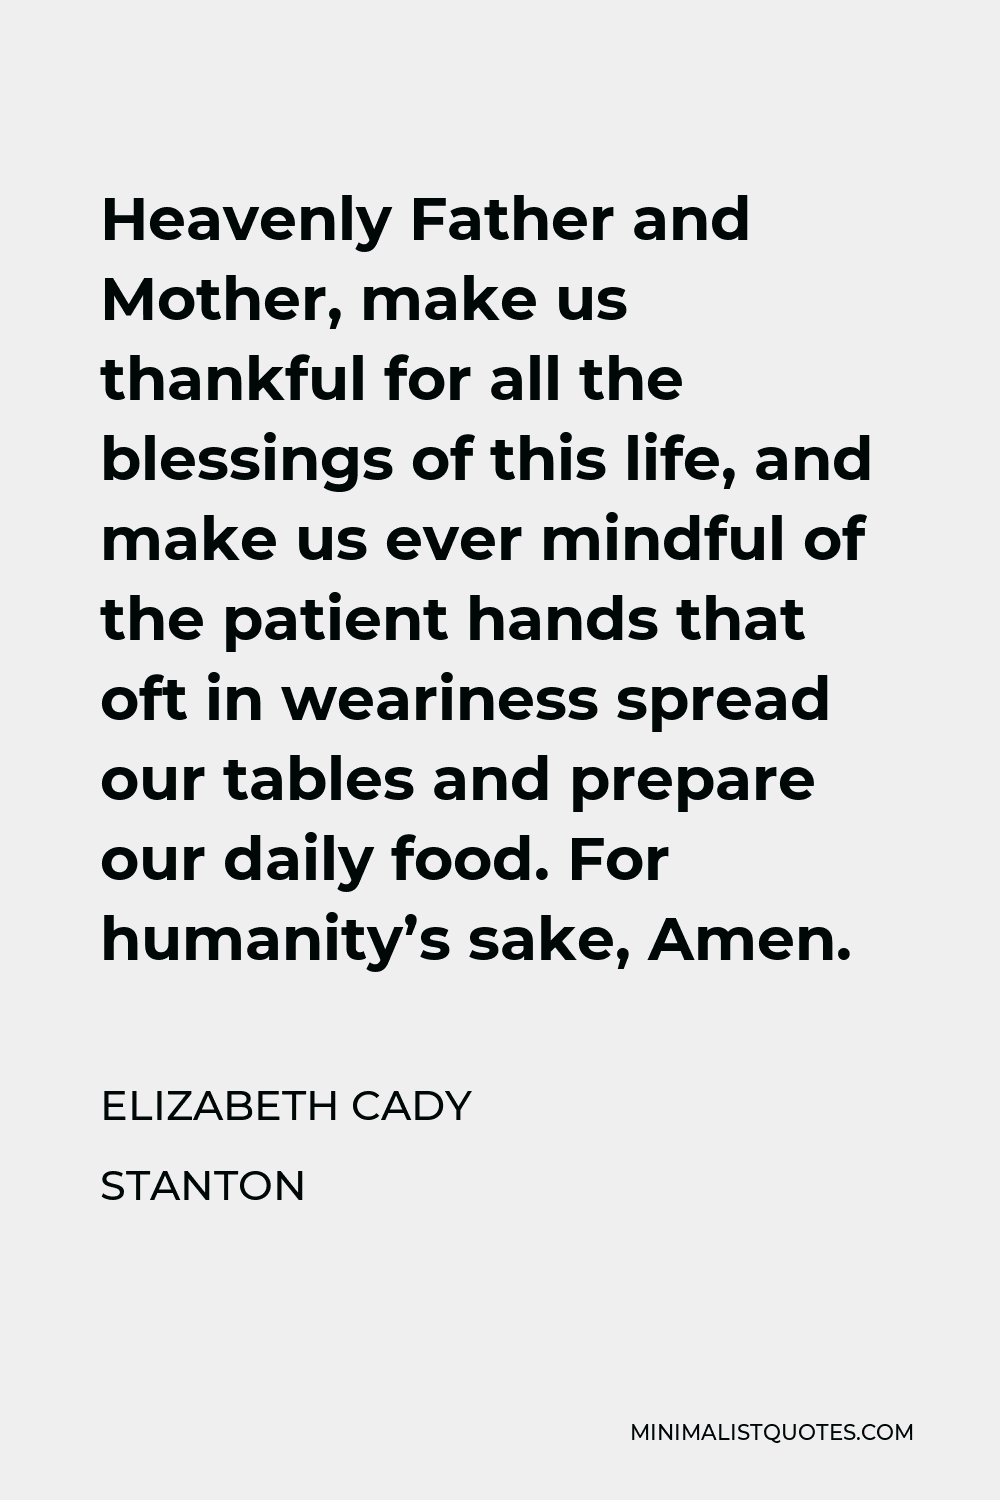 Elizabeth Cady Stanton Quote - Heavenly Father and Mother, make us thankful for all the blessings of this life, and make us ever mindful of the patient hands that oft in weariness spread our tables and prepare our daily food. For humanity’s sake, Amen.